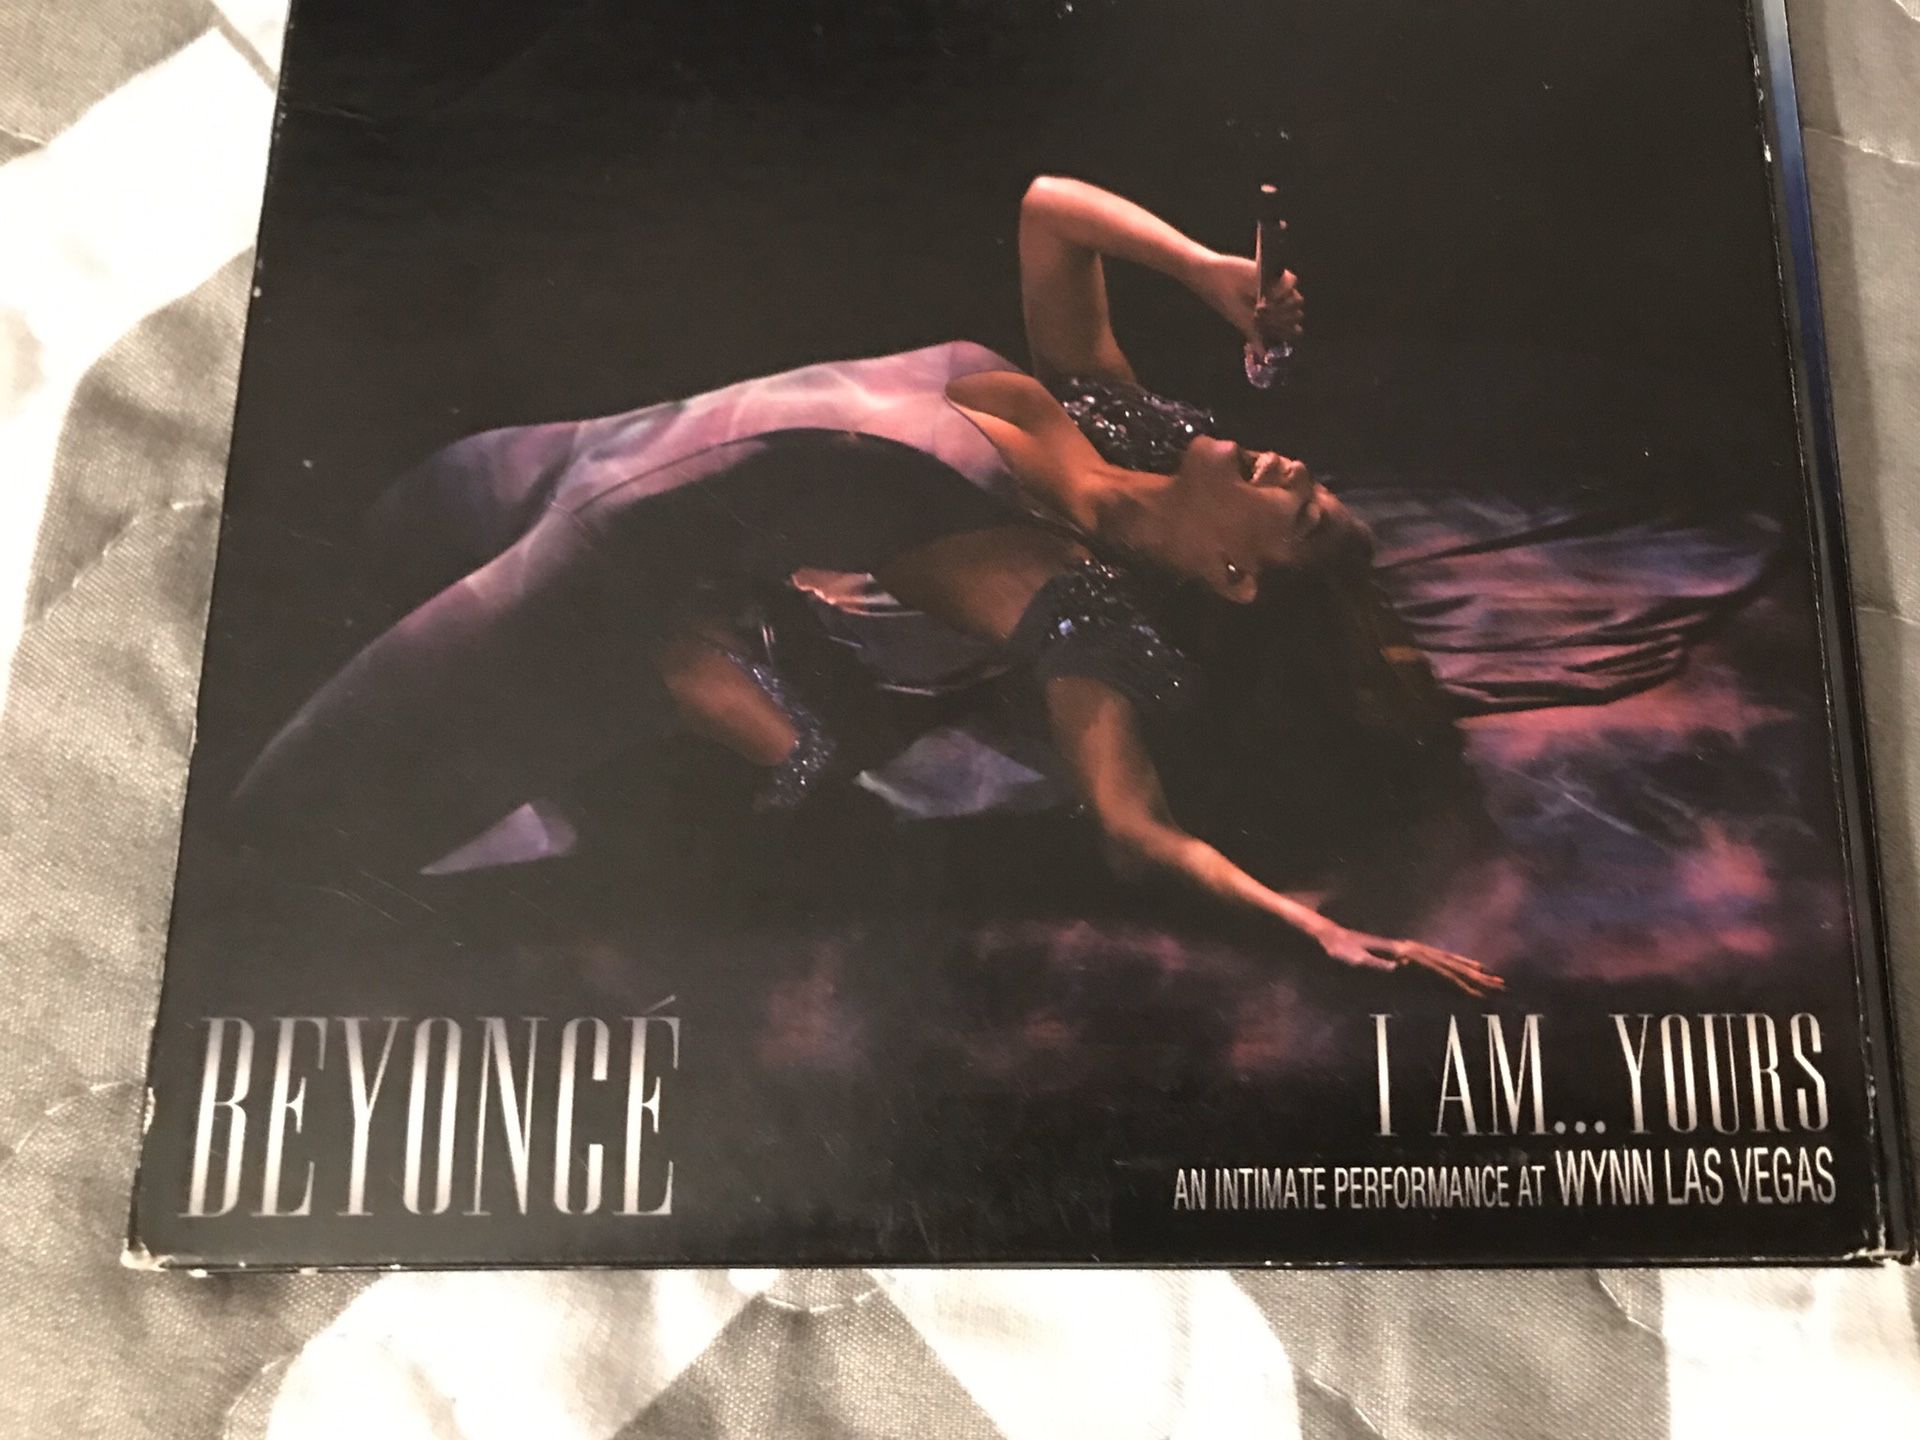 BEYONCE-I AM YOURS AN INTIMATE PERFORMANCE AT WYNN LAS VEGAS